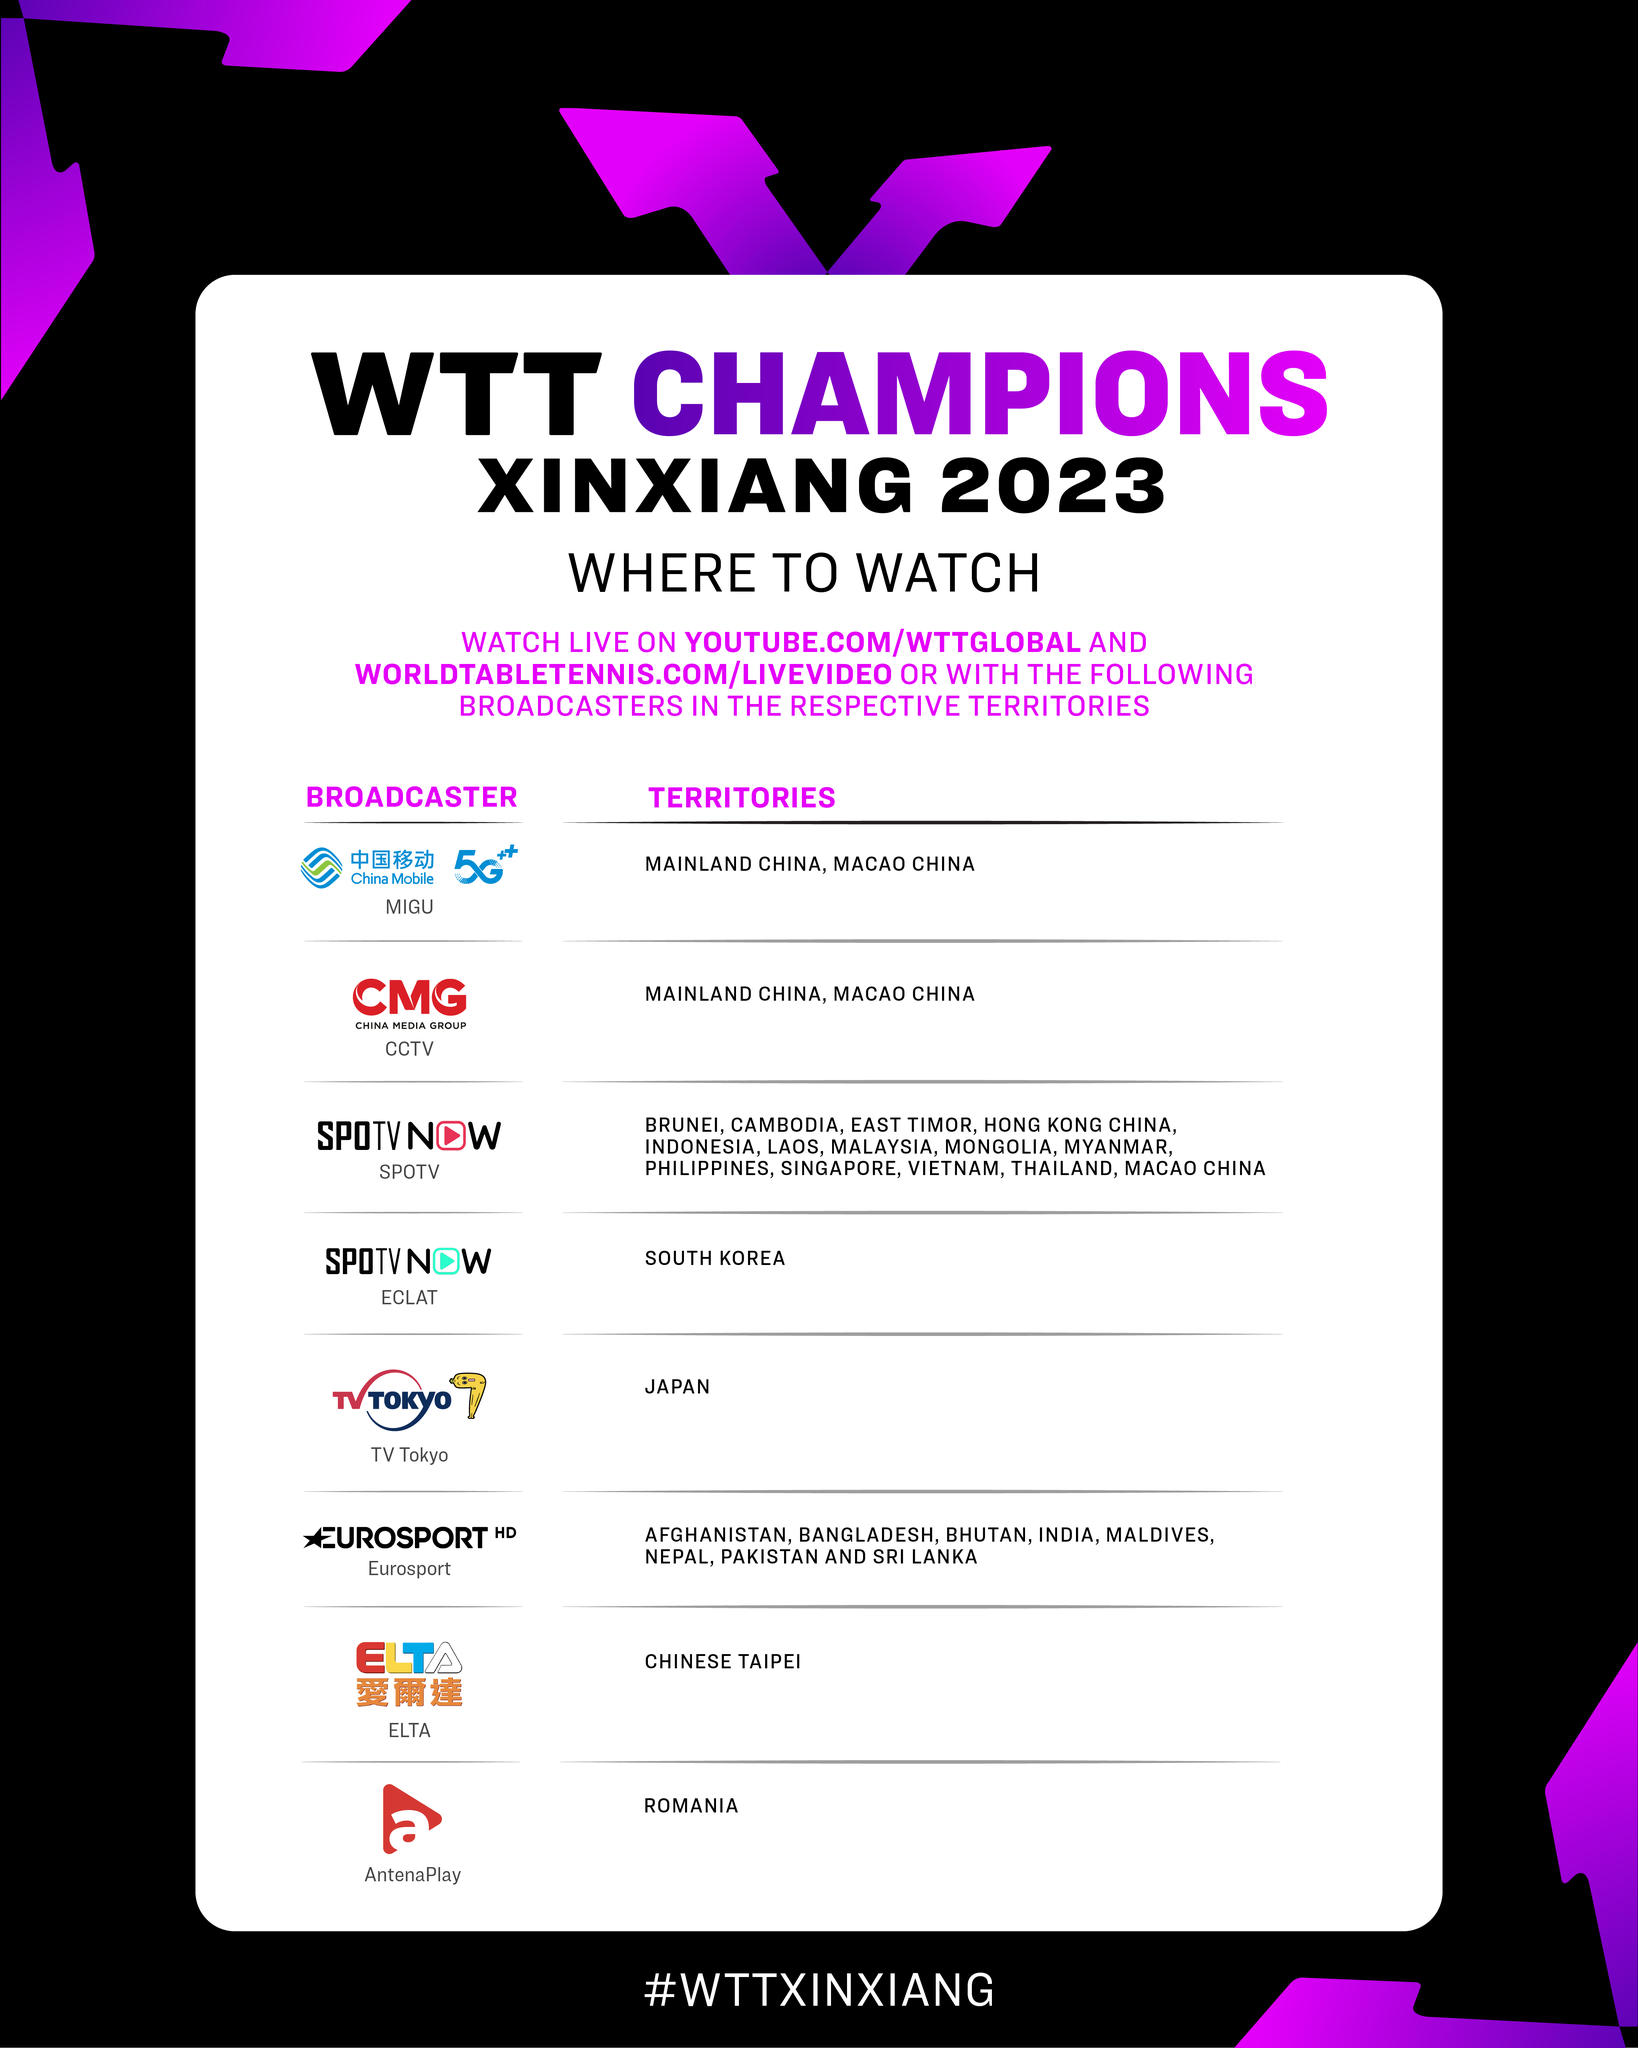 Wondering where to find your fix of the upcoming #WTTChampions Xinxiang action